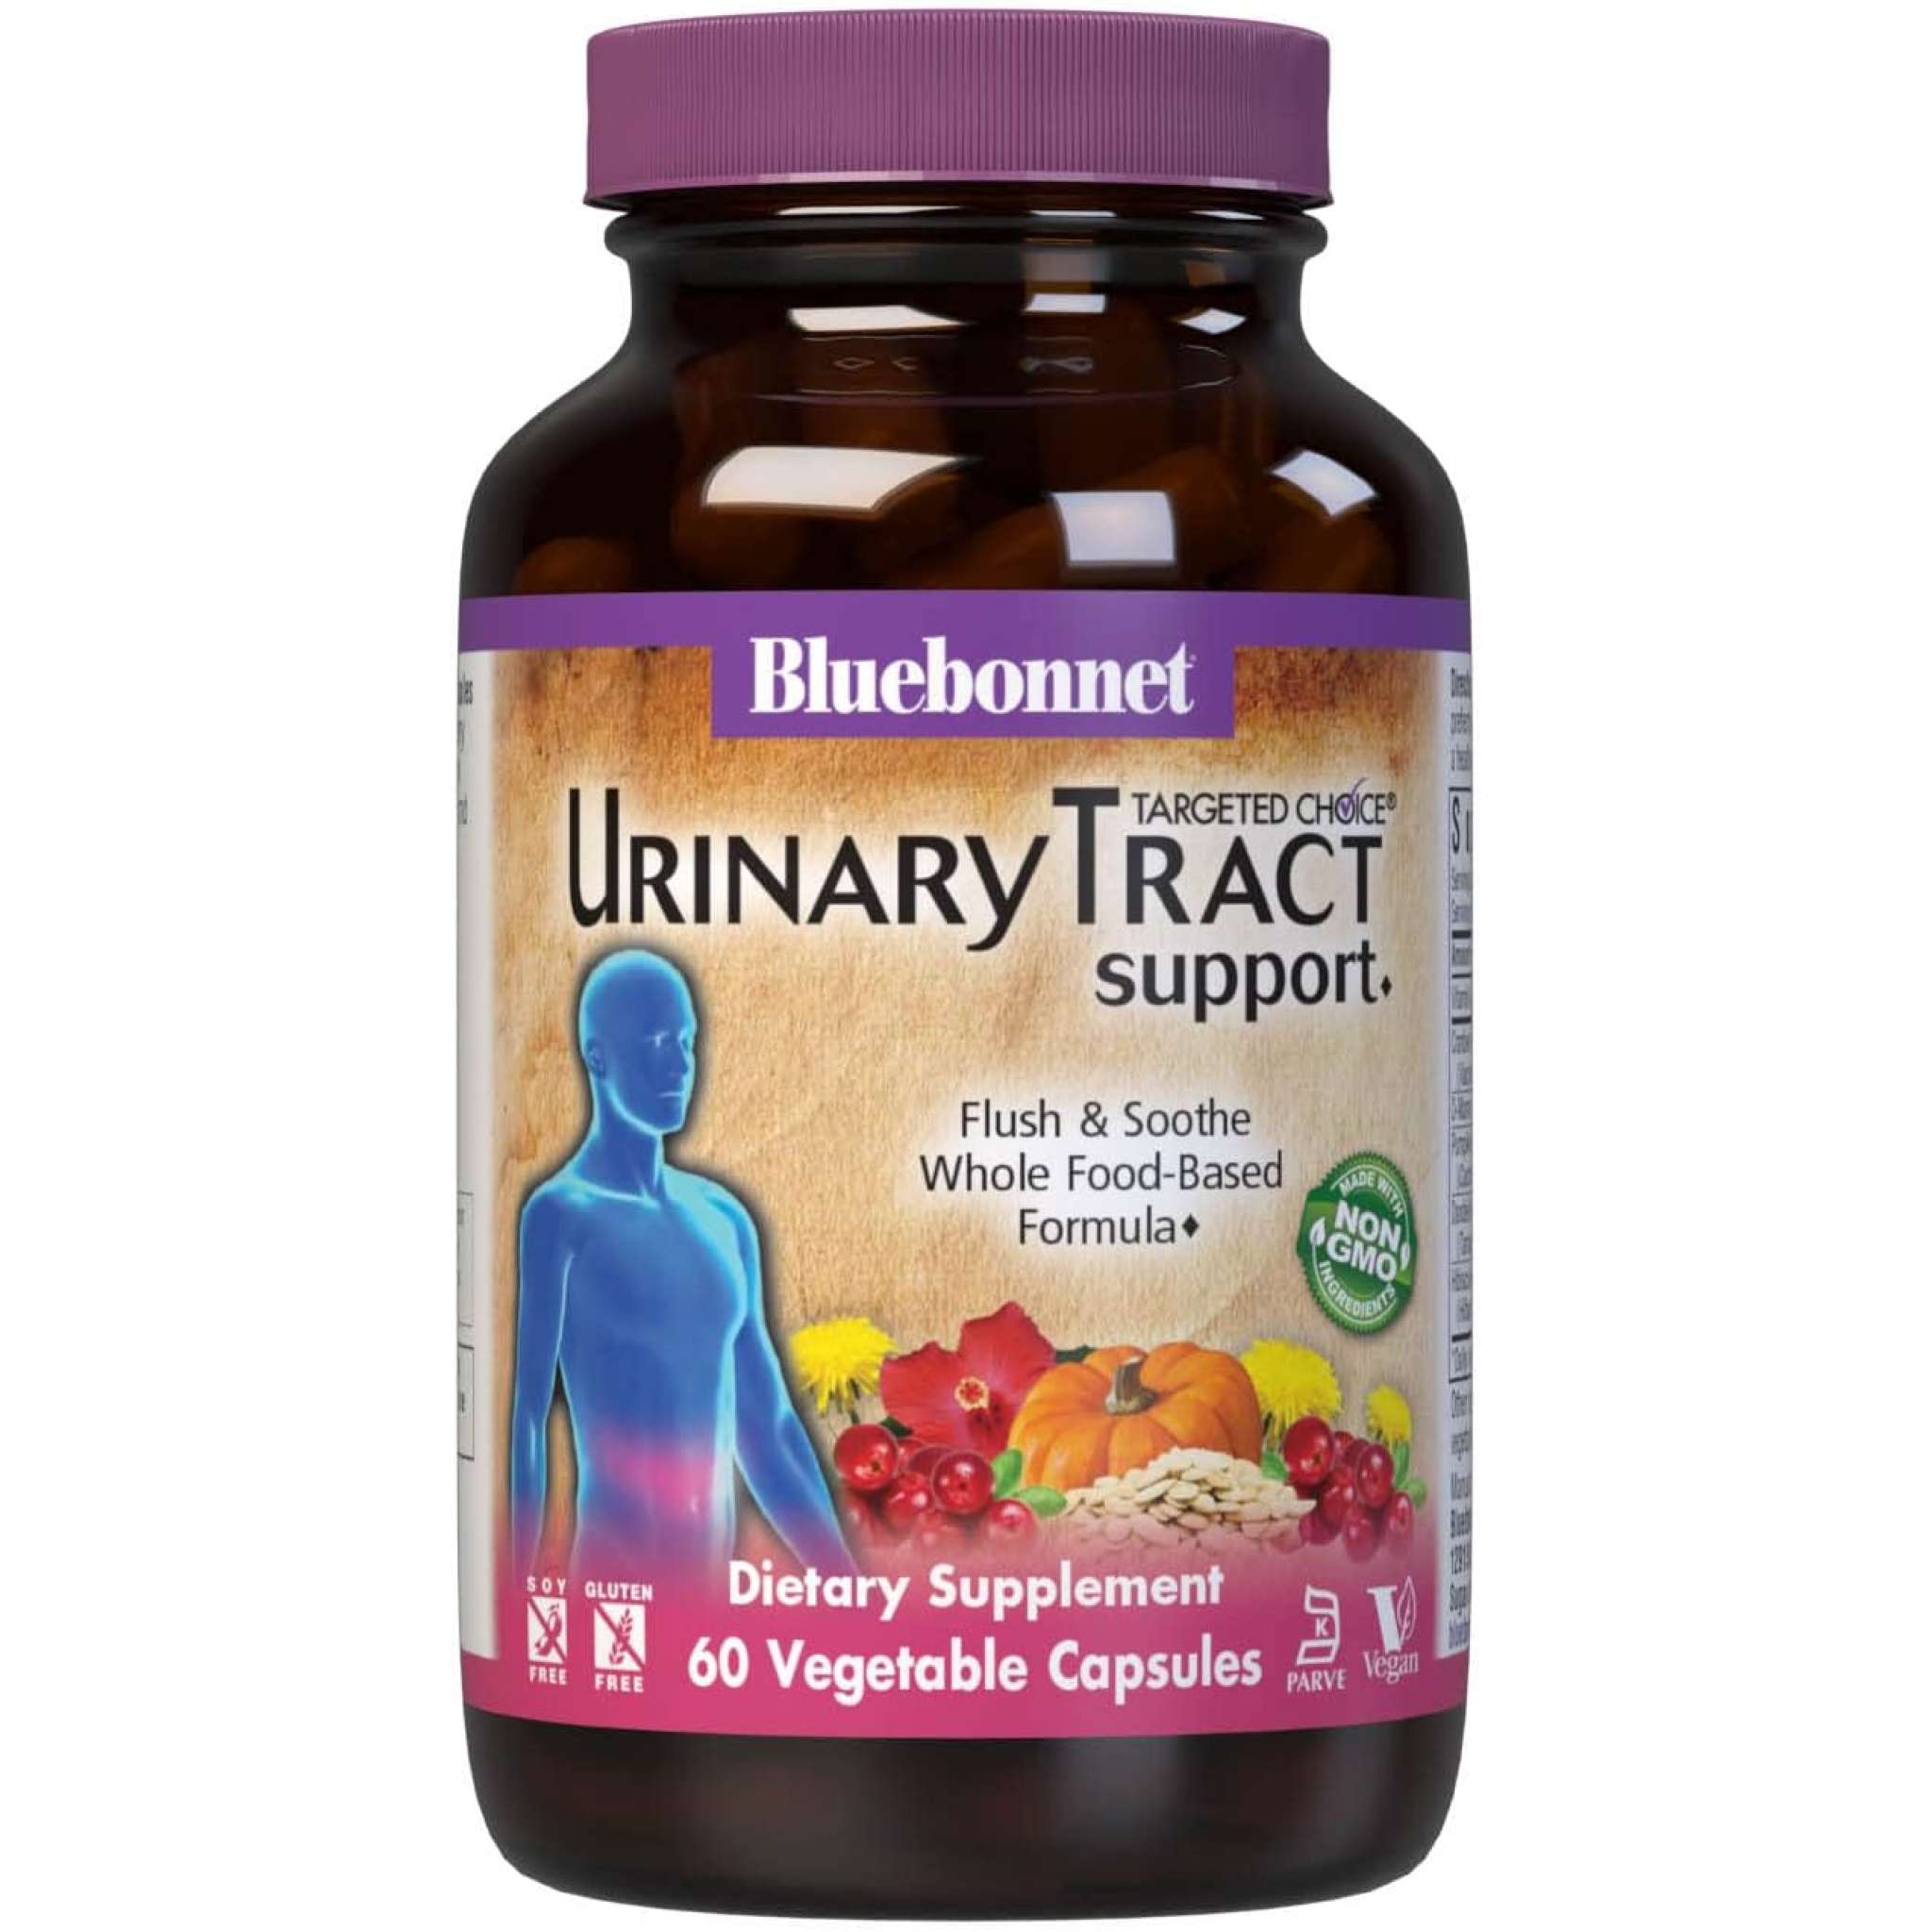 Bluebonnet - Urinary Tract Support